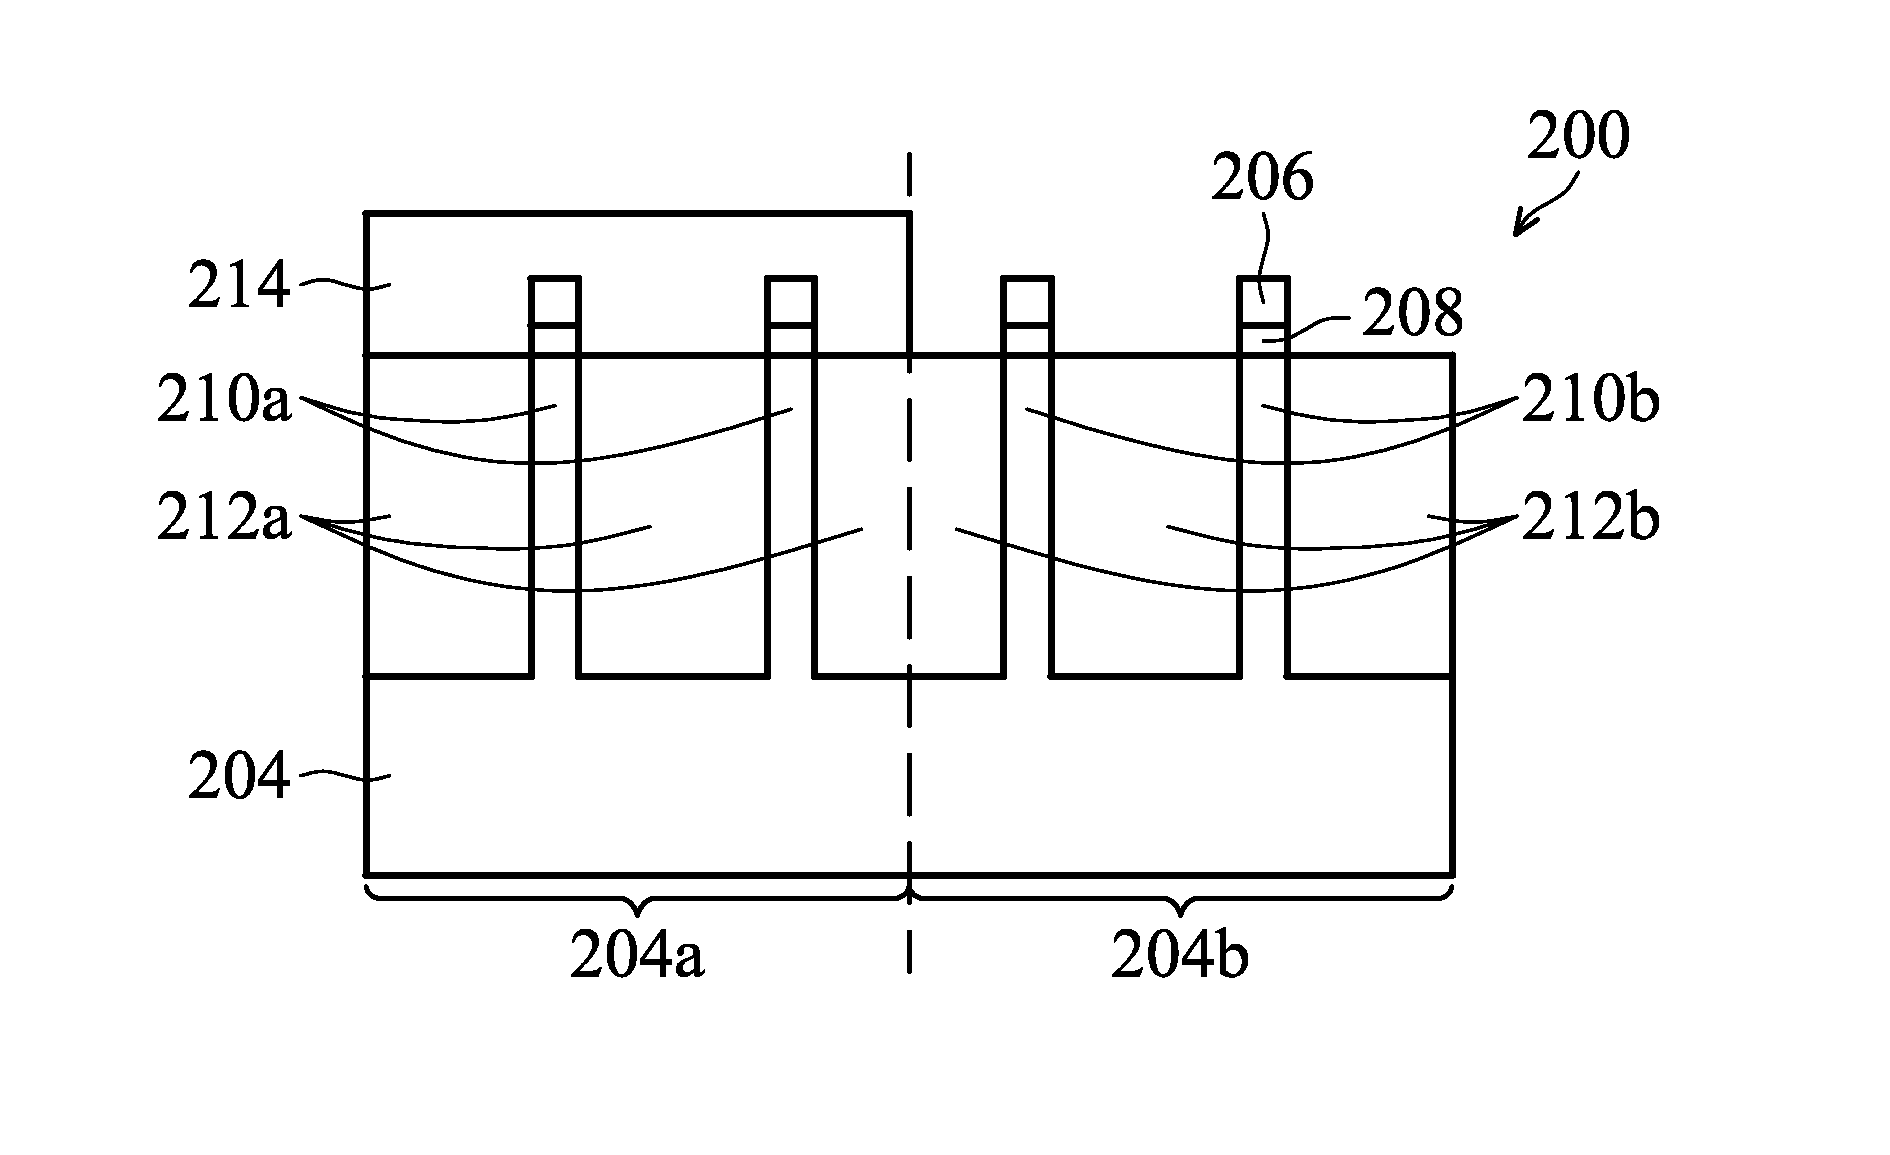 Mechanisms for forming finfets with different fin heights